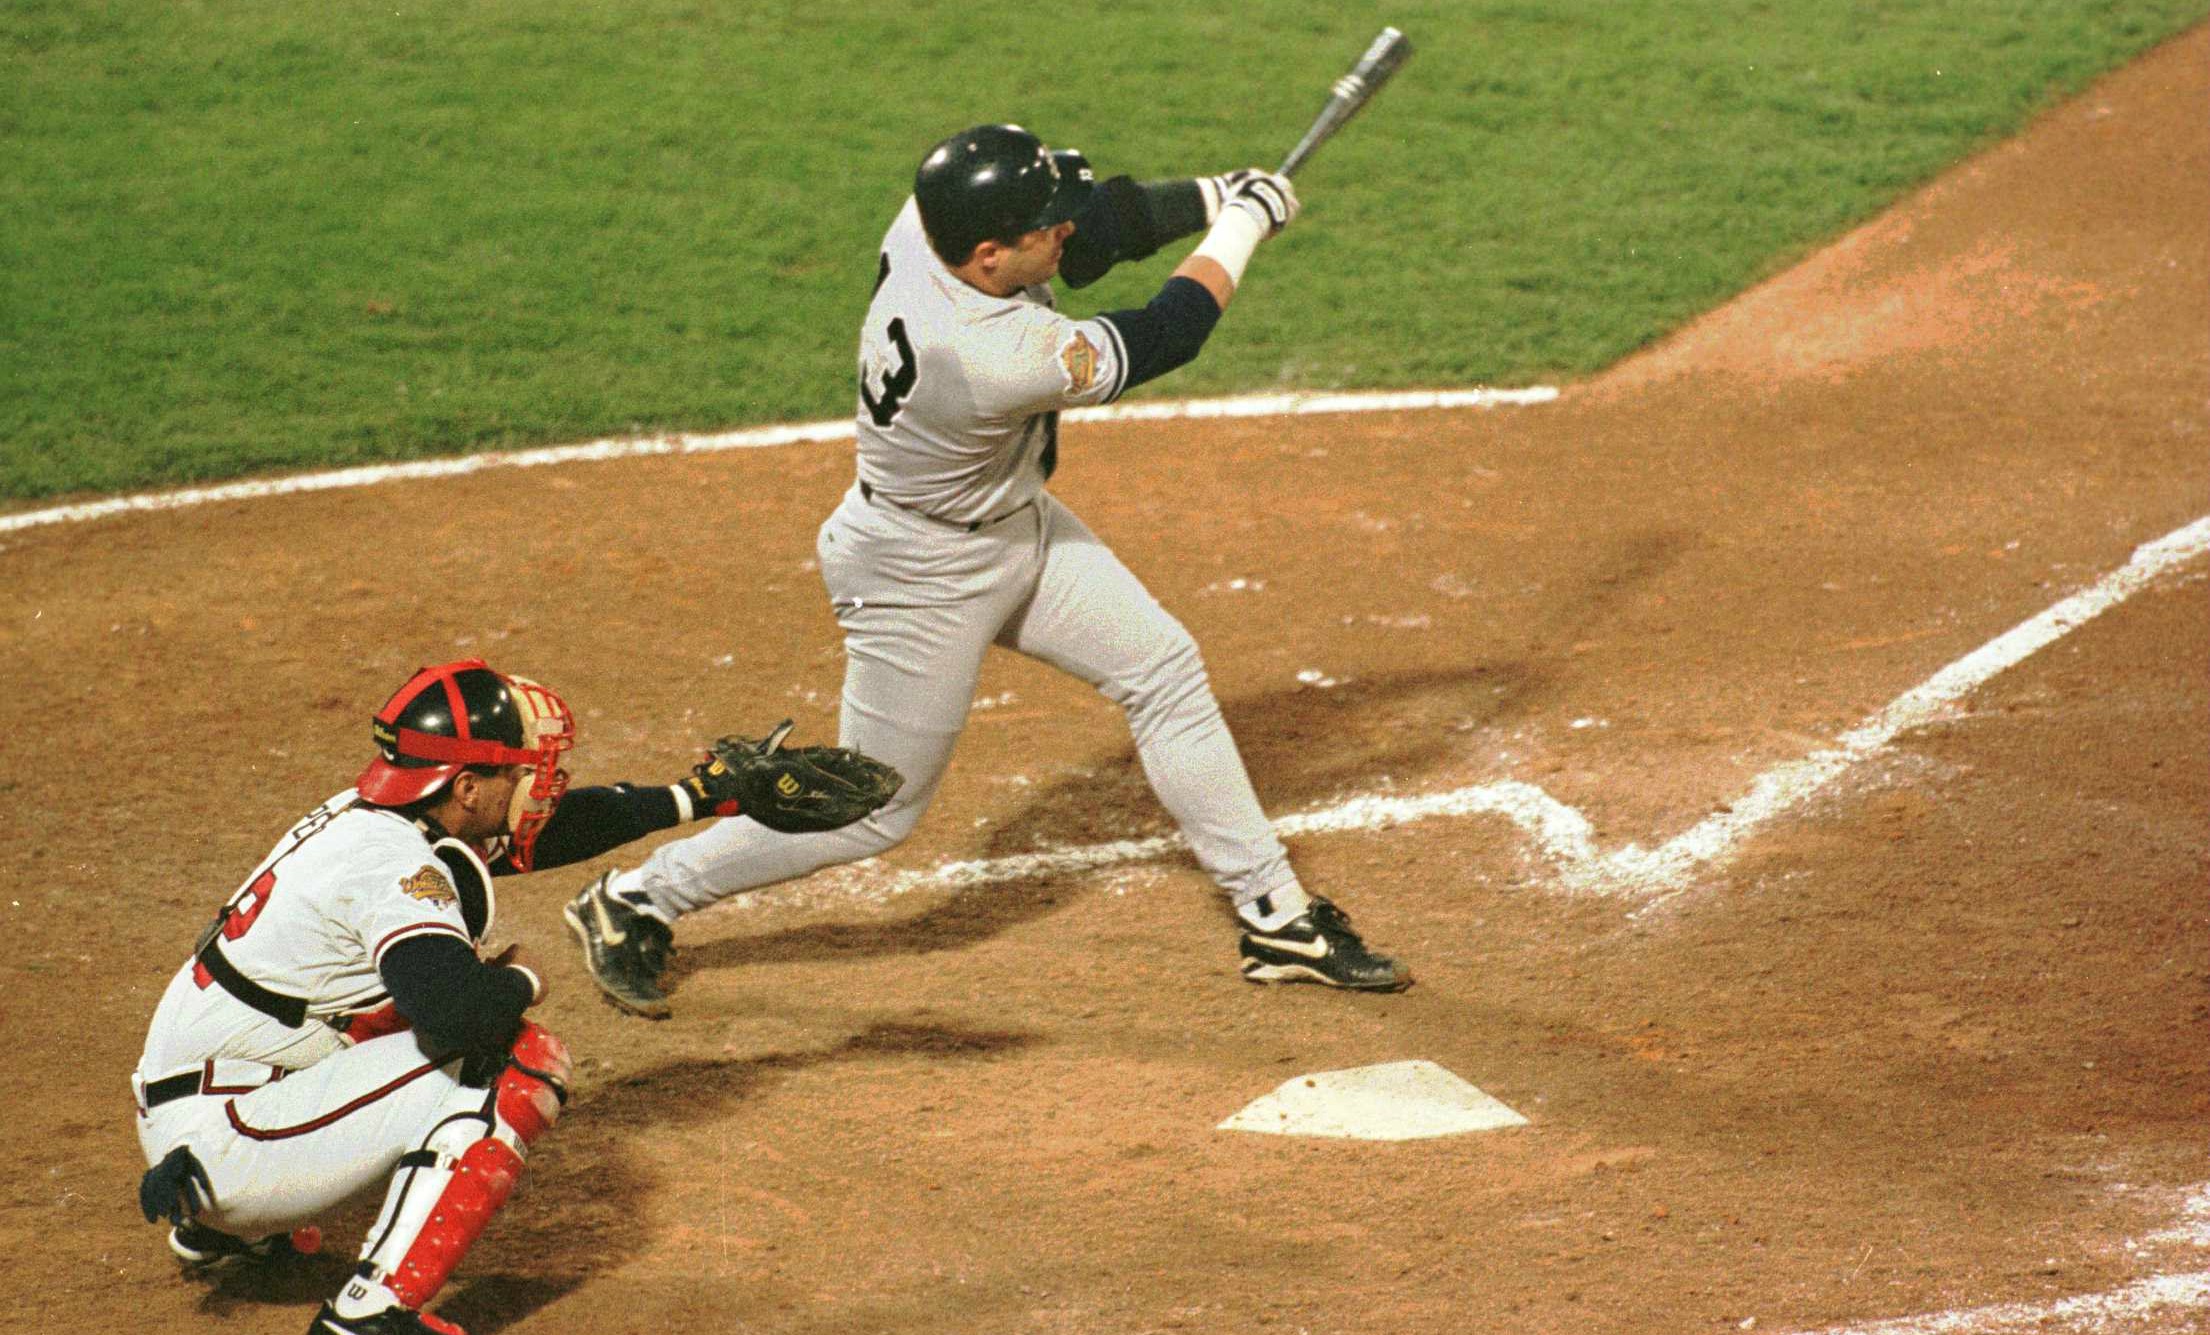 Jim Leyritz homers in Game 4 of 1996 World Series